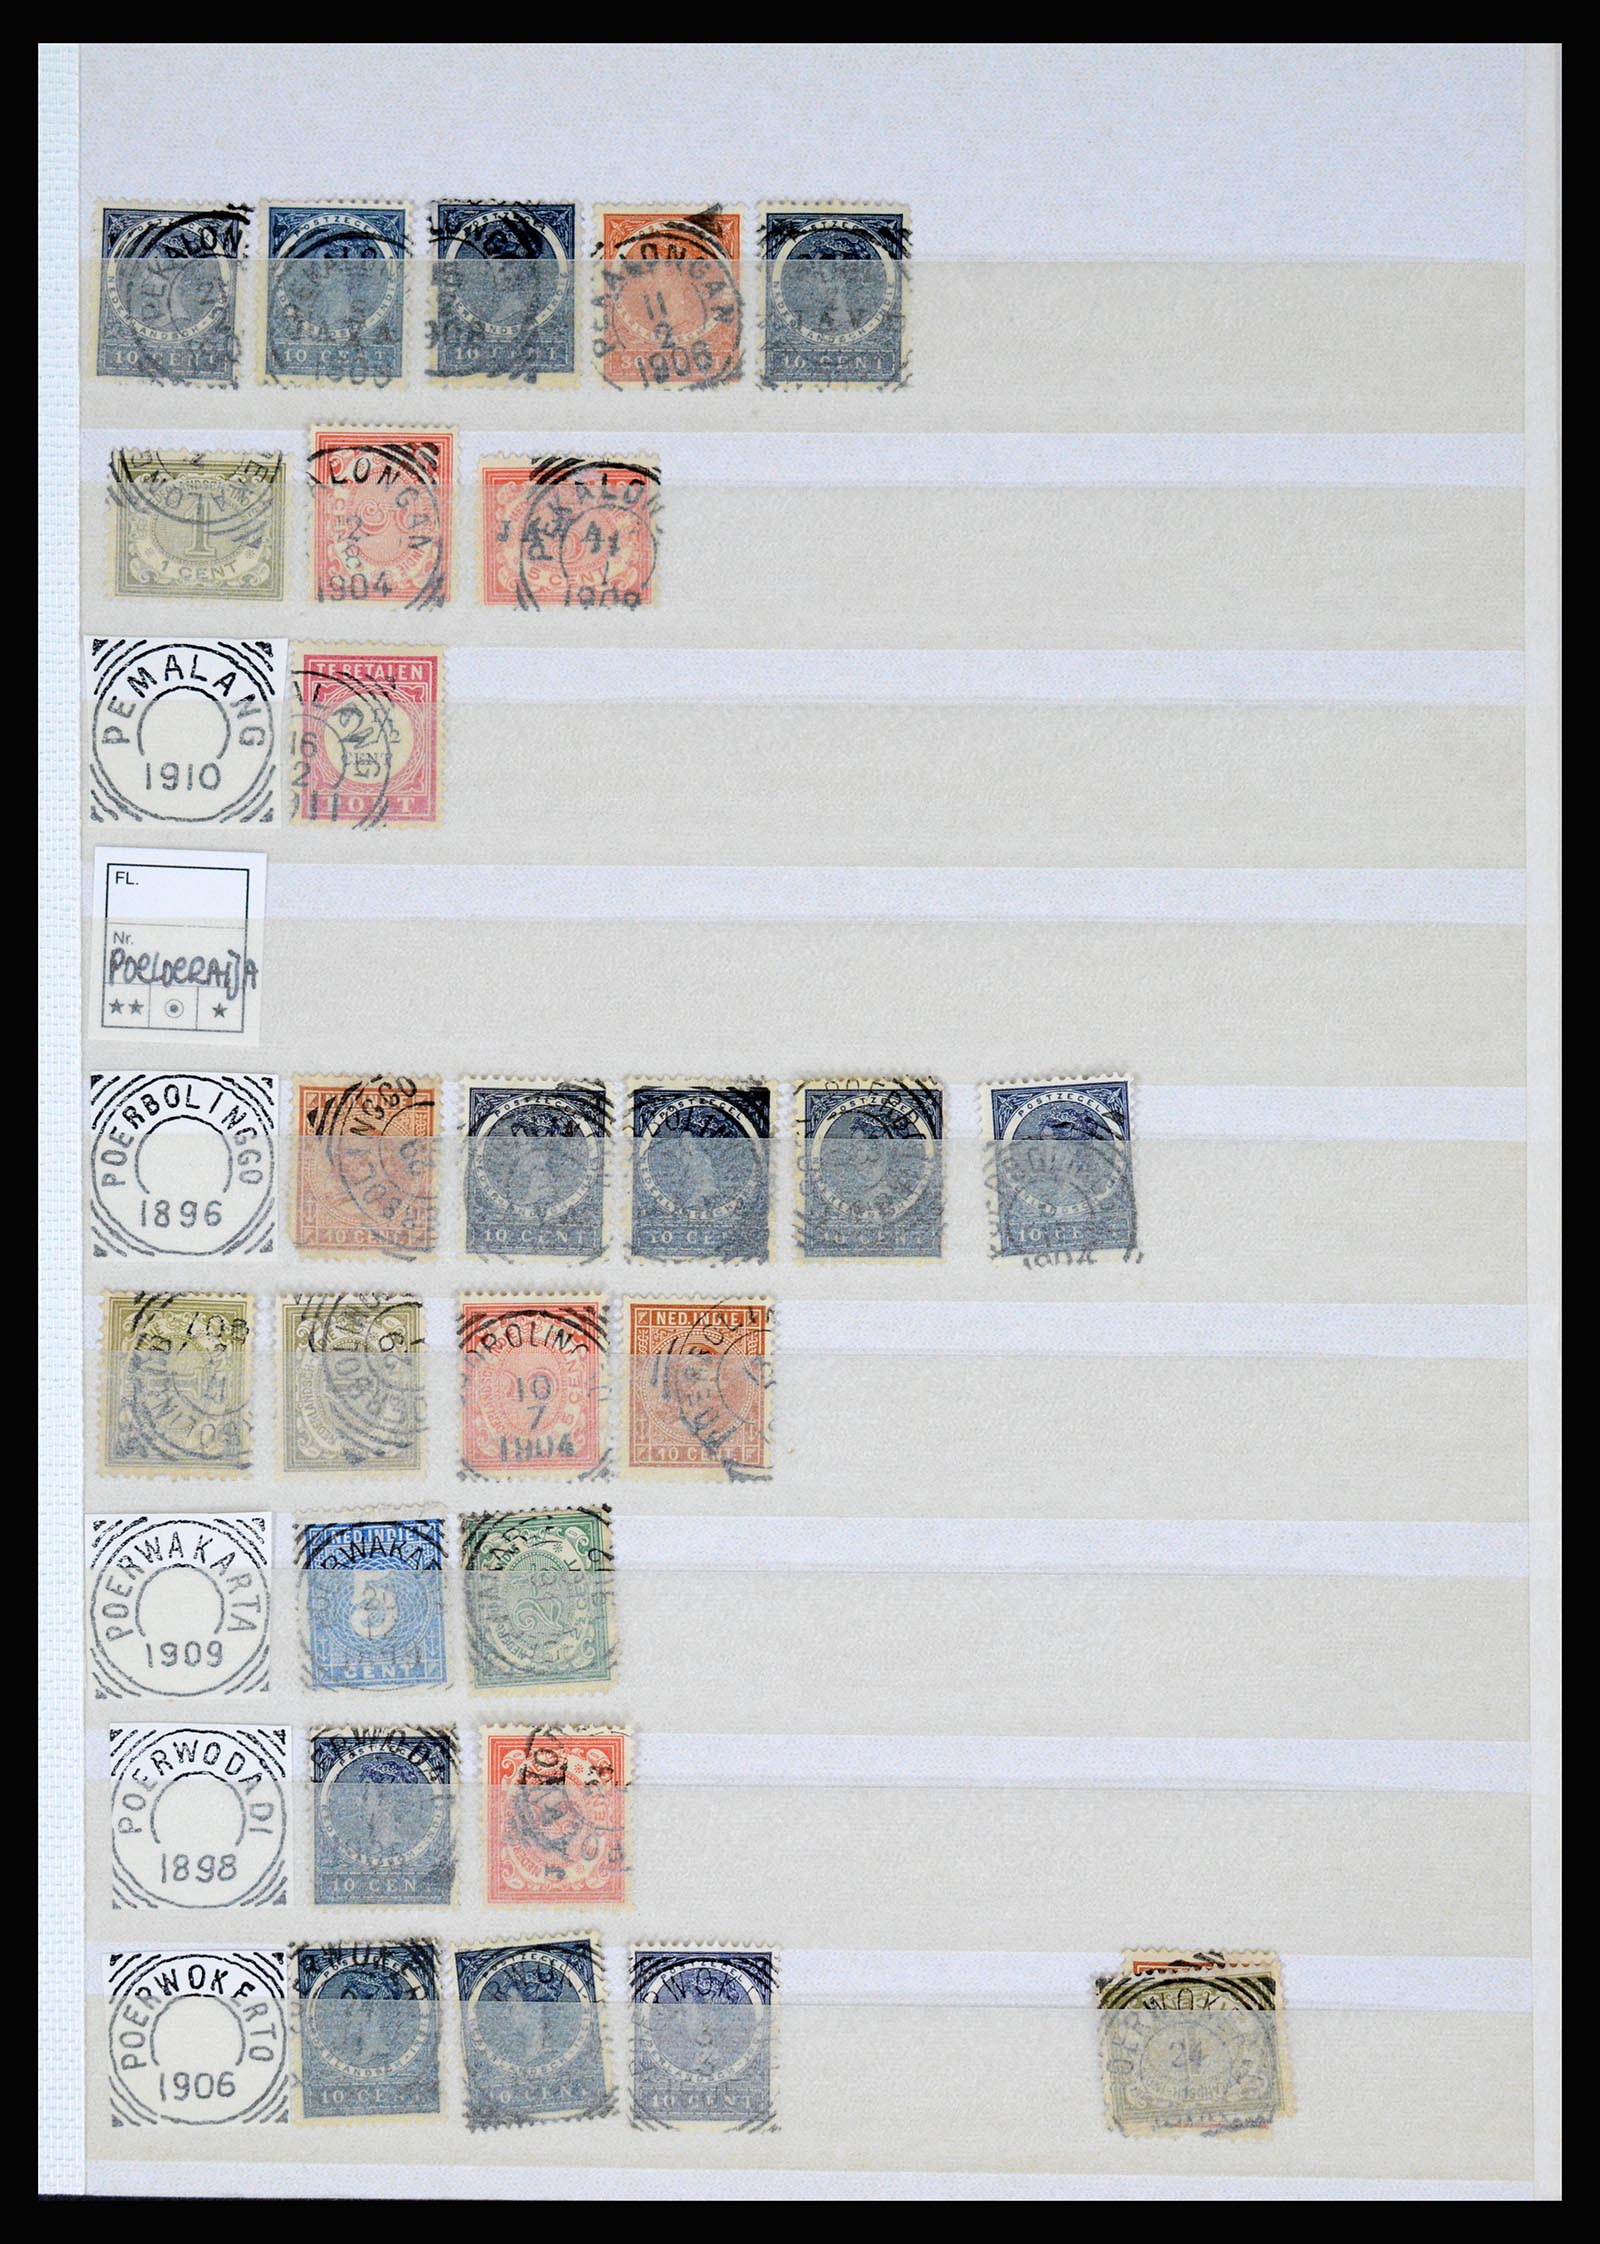 36839 084 - Stamp collection 36839 Dutch east Indies square cancels.